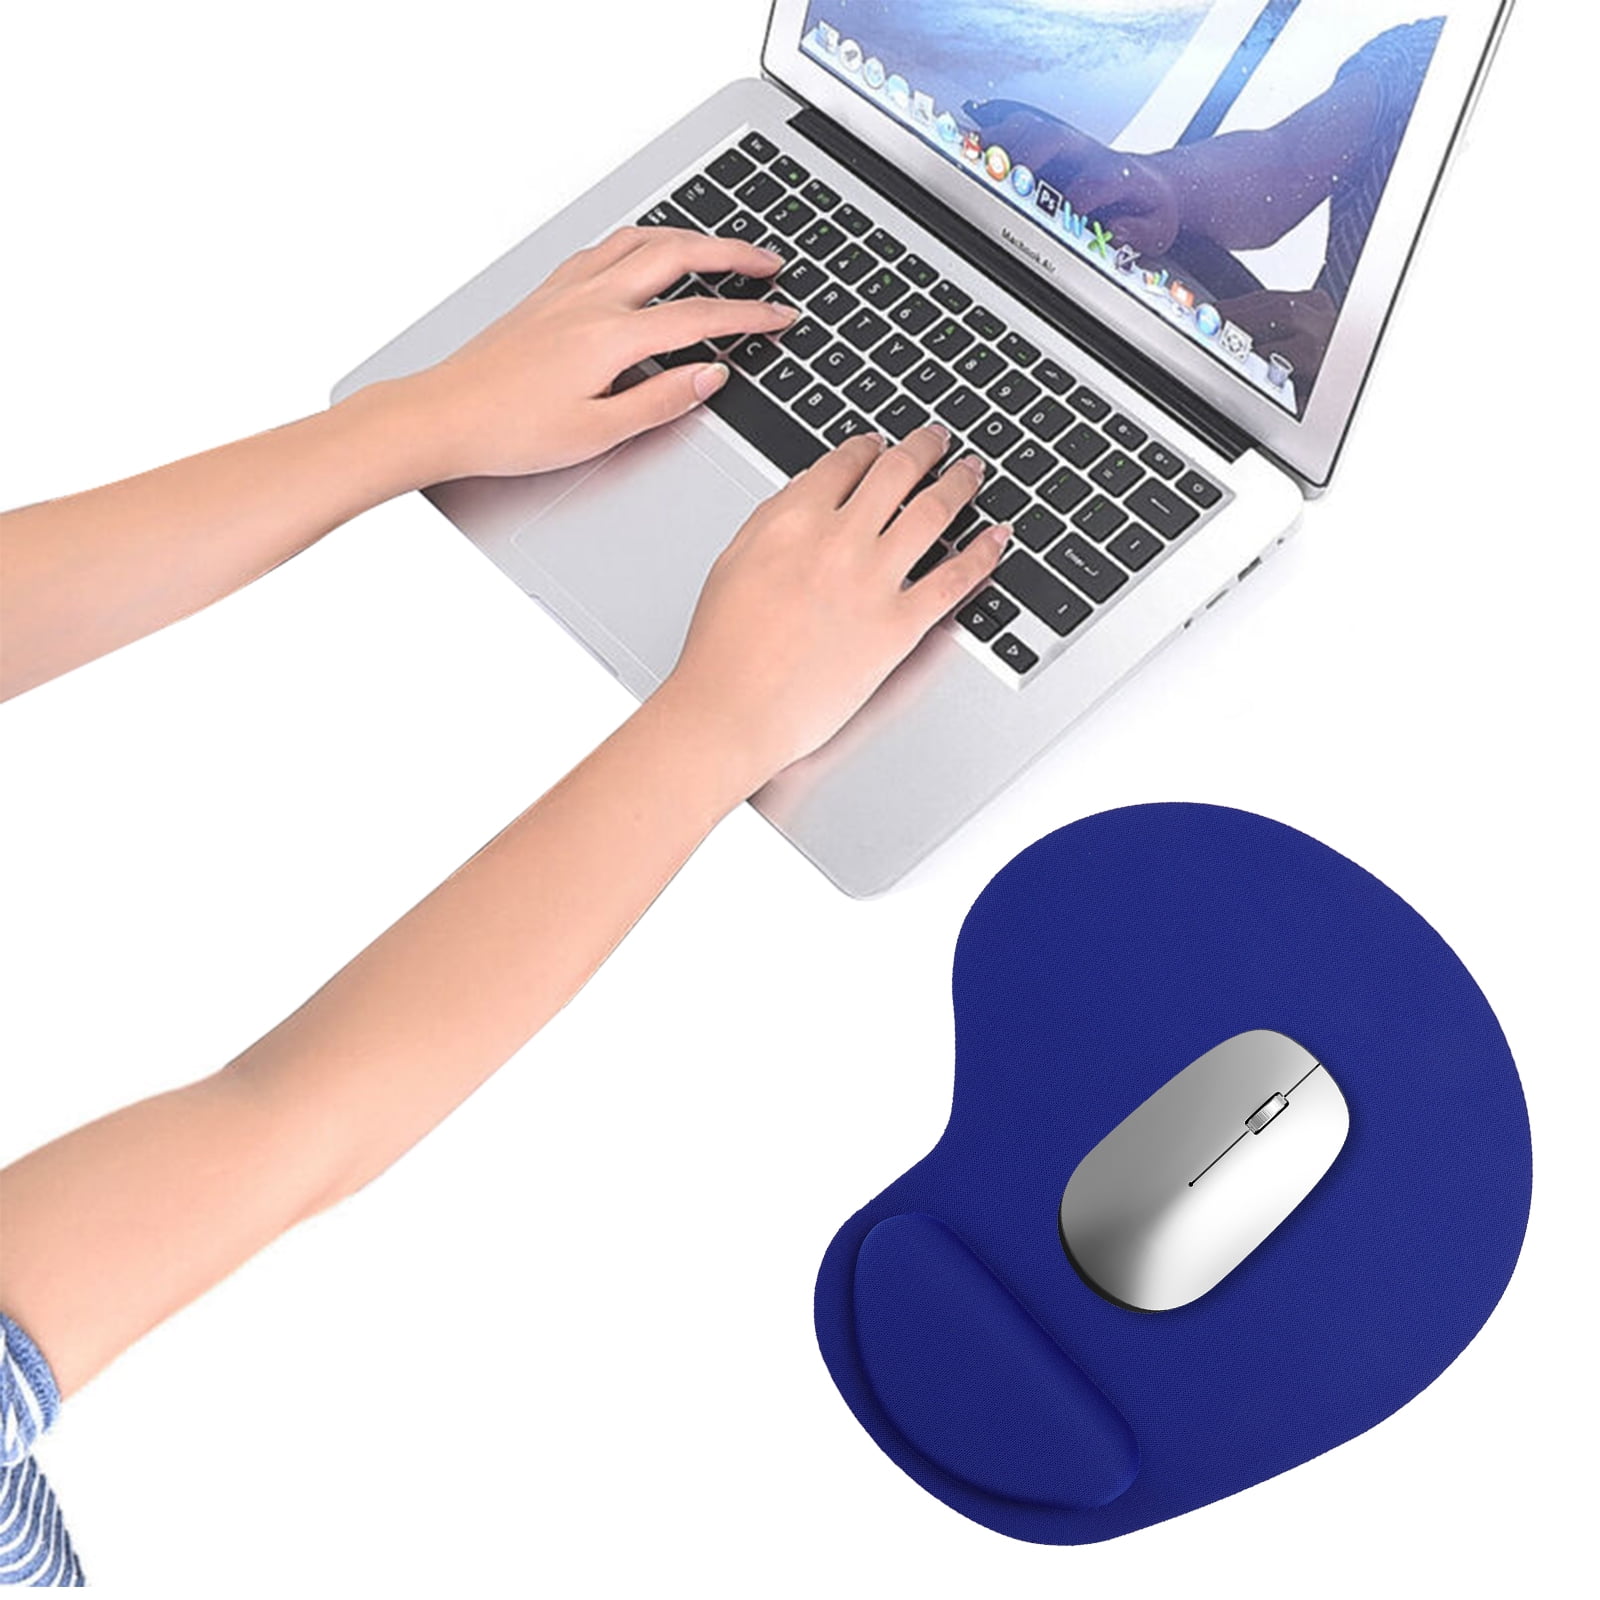 Computer Non Slip Mousepad with Lycra Cloth Ergonomic Mouse Pad with Wrist Support Laptop & Mac Cute Elephant-Wrist Non-Slip PU Base Easy Typing Mouse Mat for Office